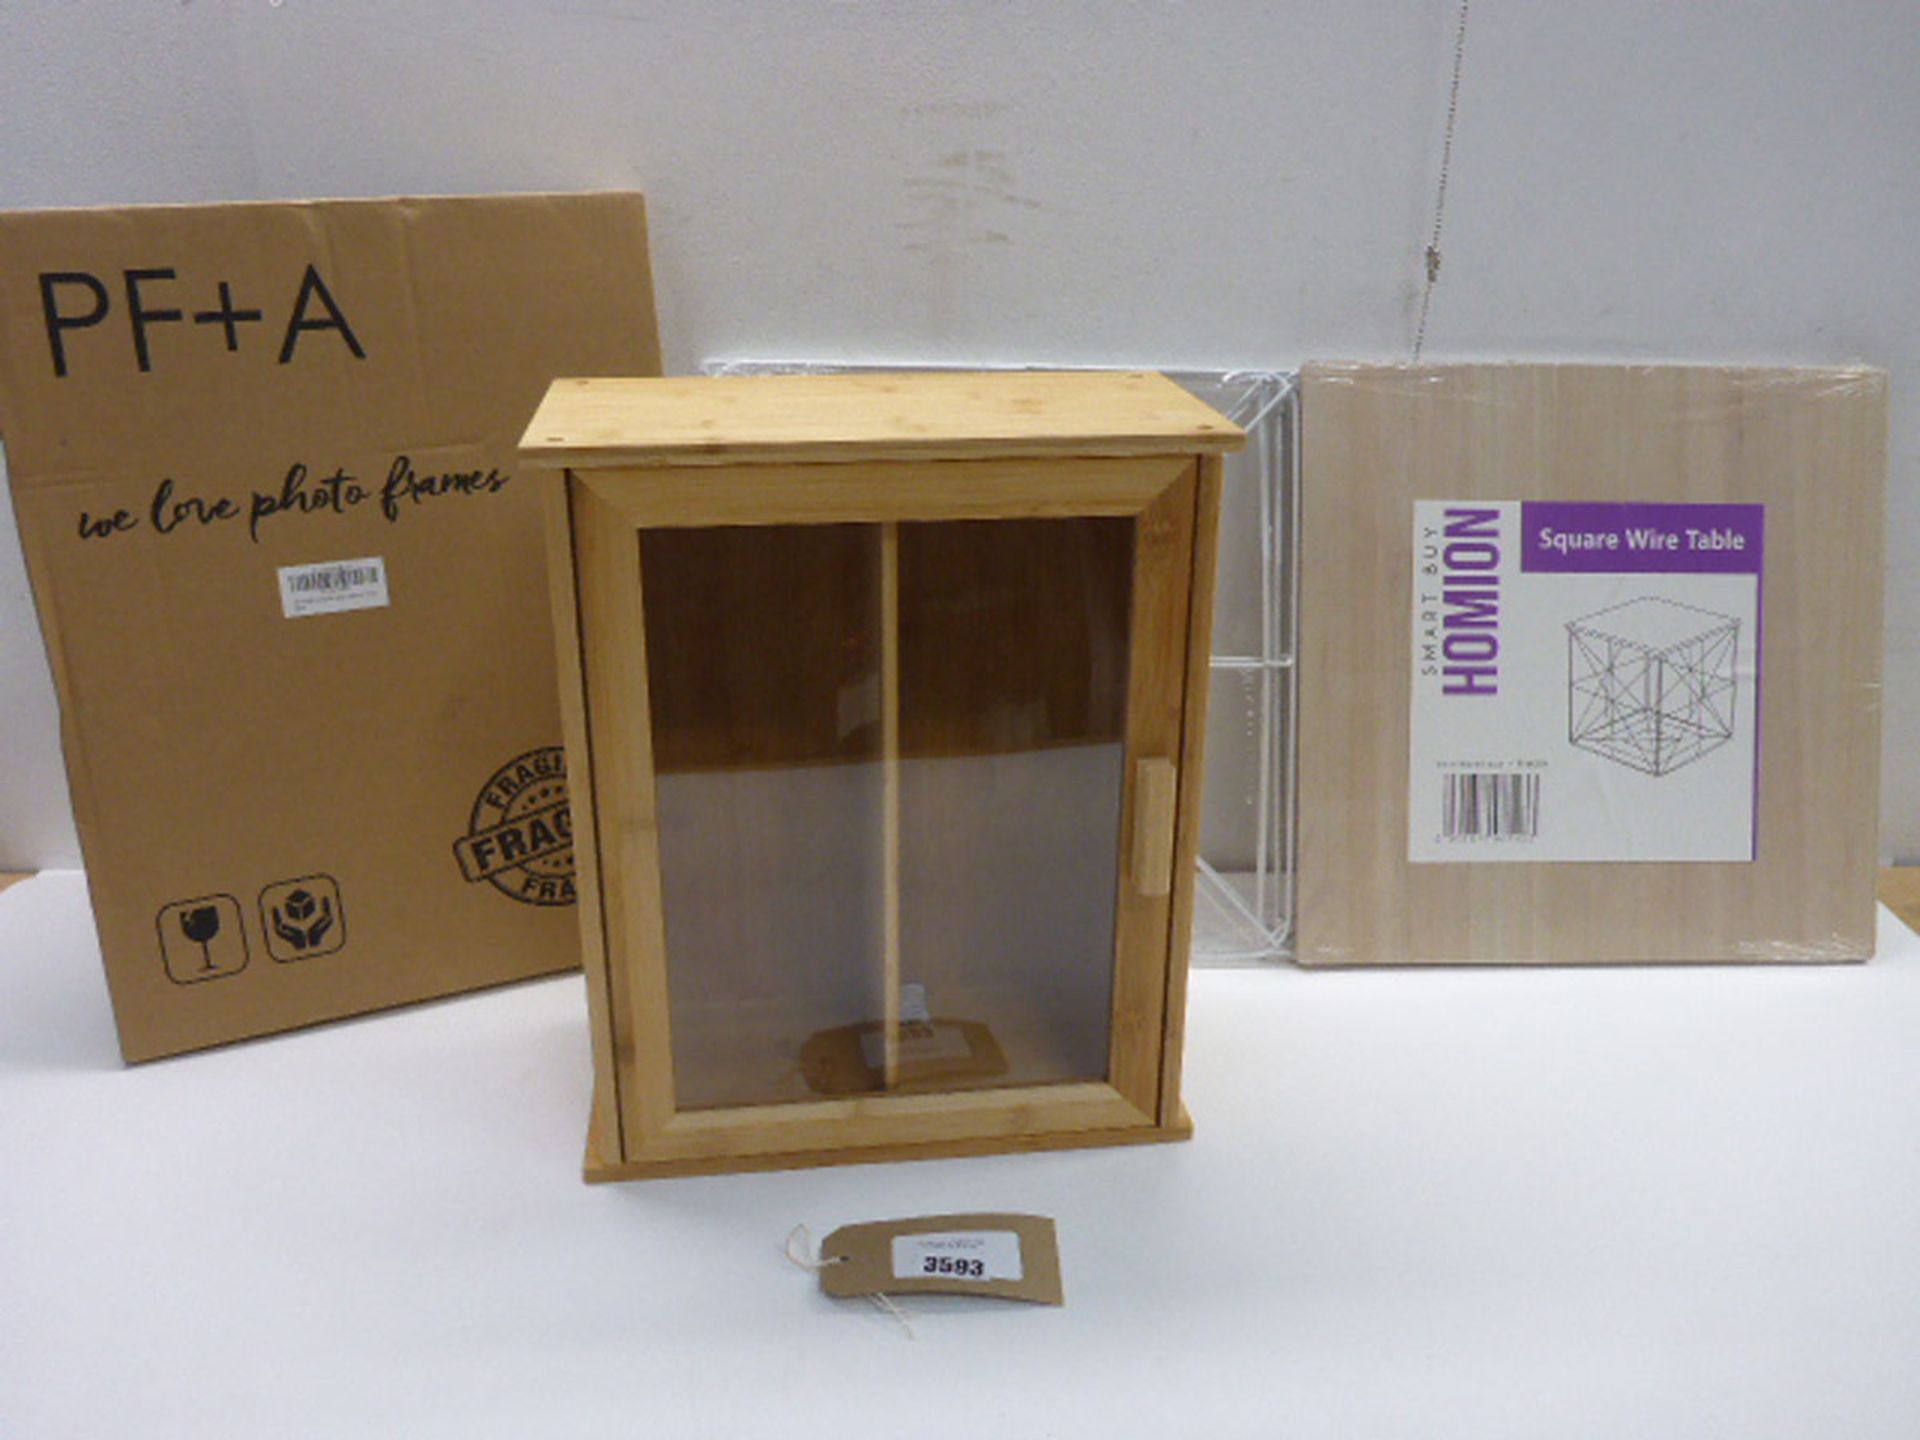 Square wire table in flat pack form, Small display case and photo frame